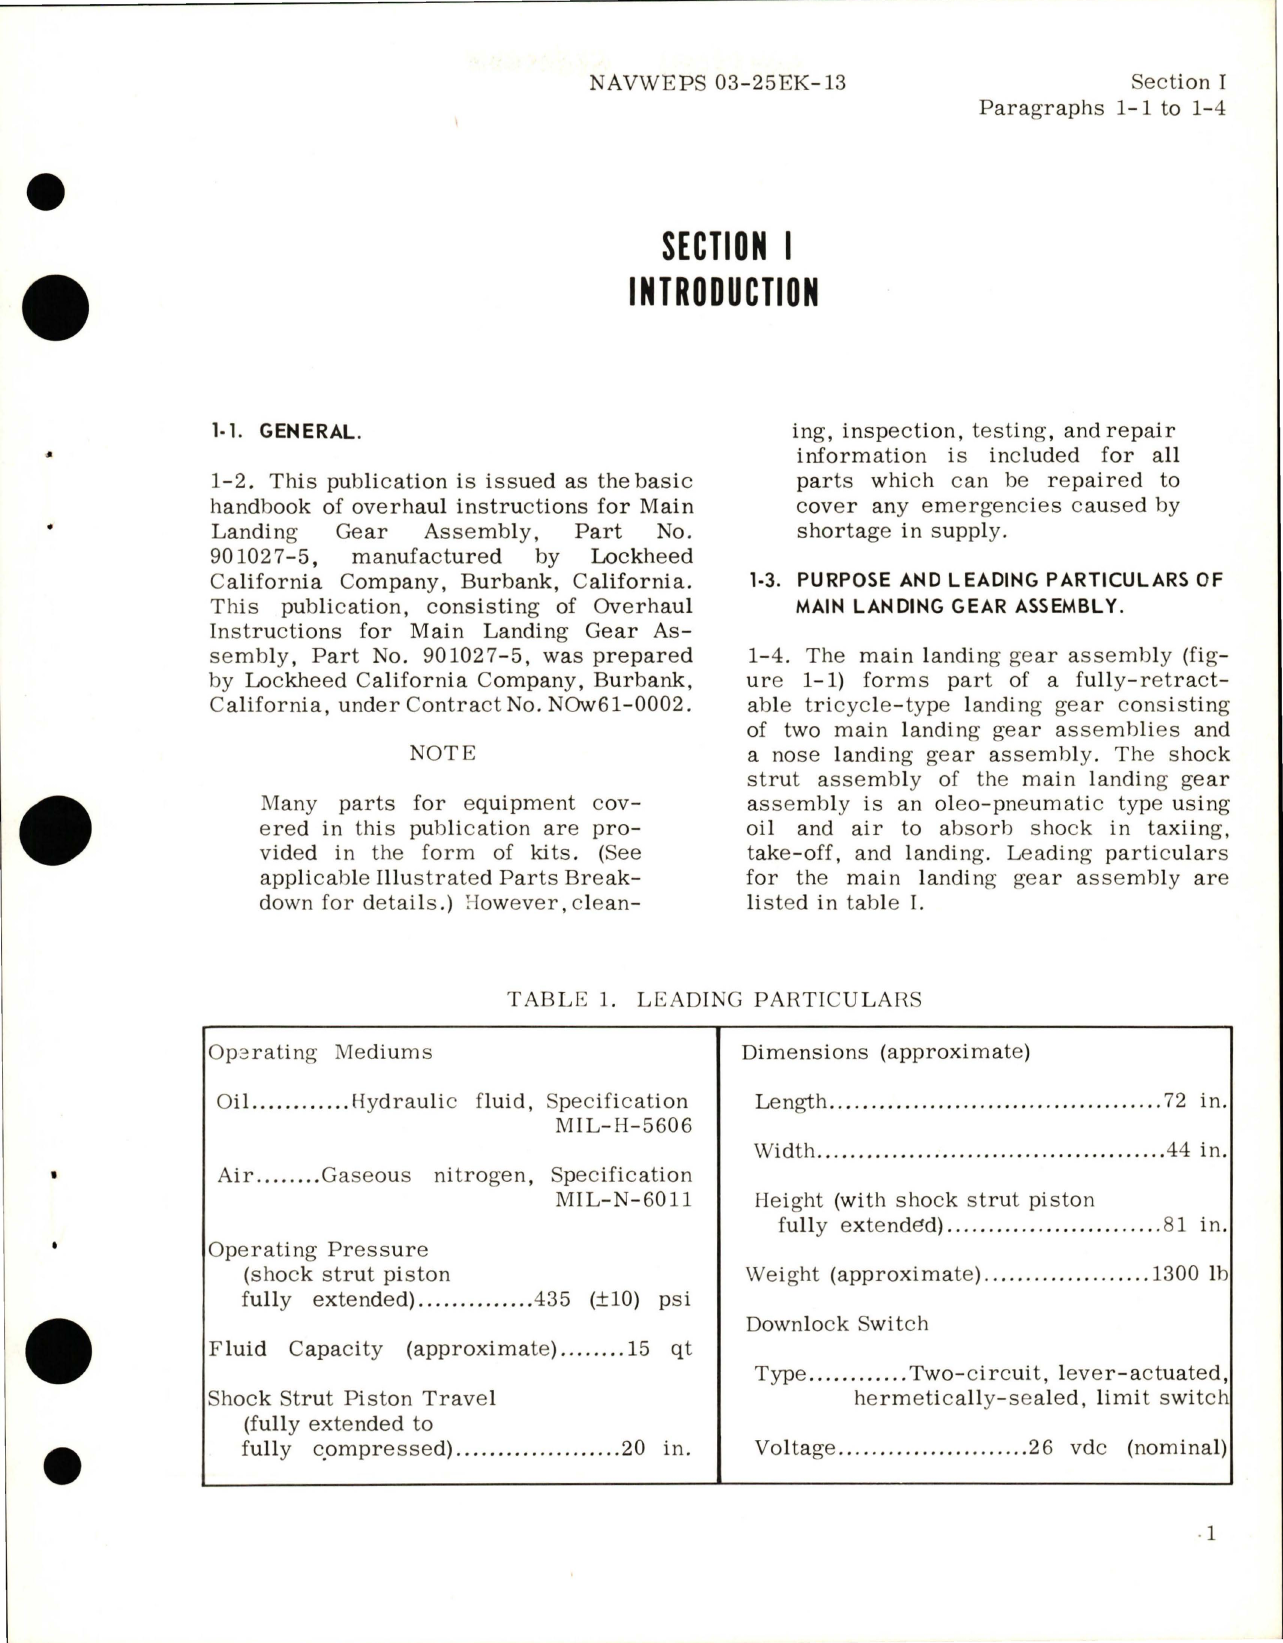 Sample page 5 from AirCorps Library document: Overhaul Instructions for Main Landing Gear Assembly - Part 901027-5